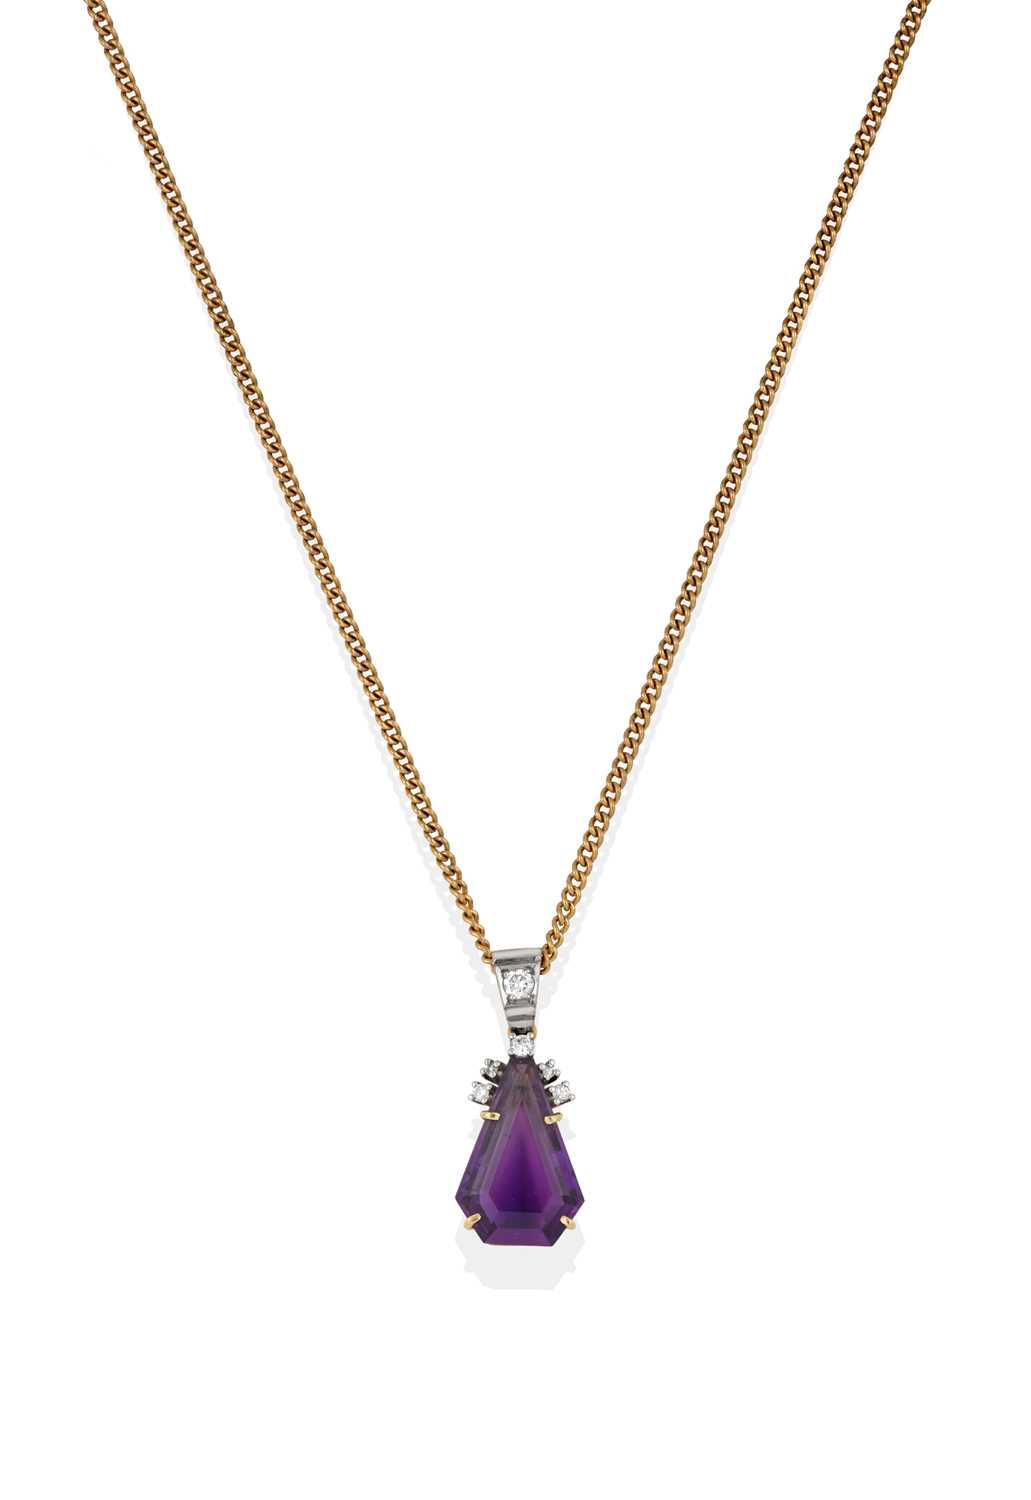 Lot 2386 - An Amethyst and Diamond Pendant on Chain